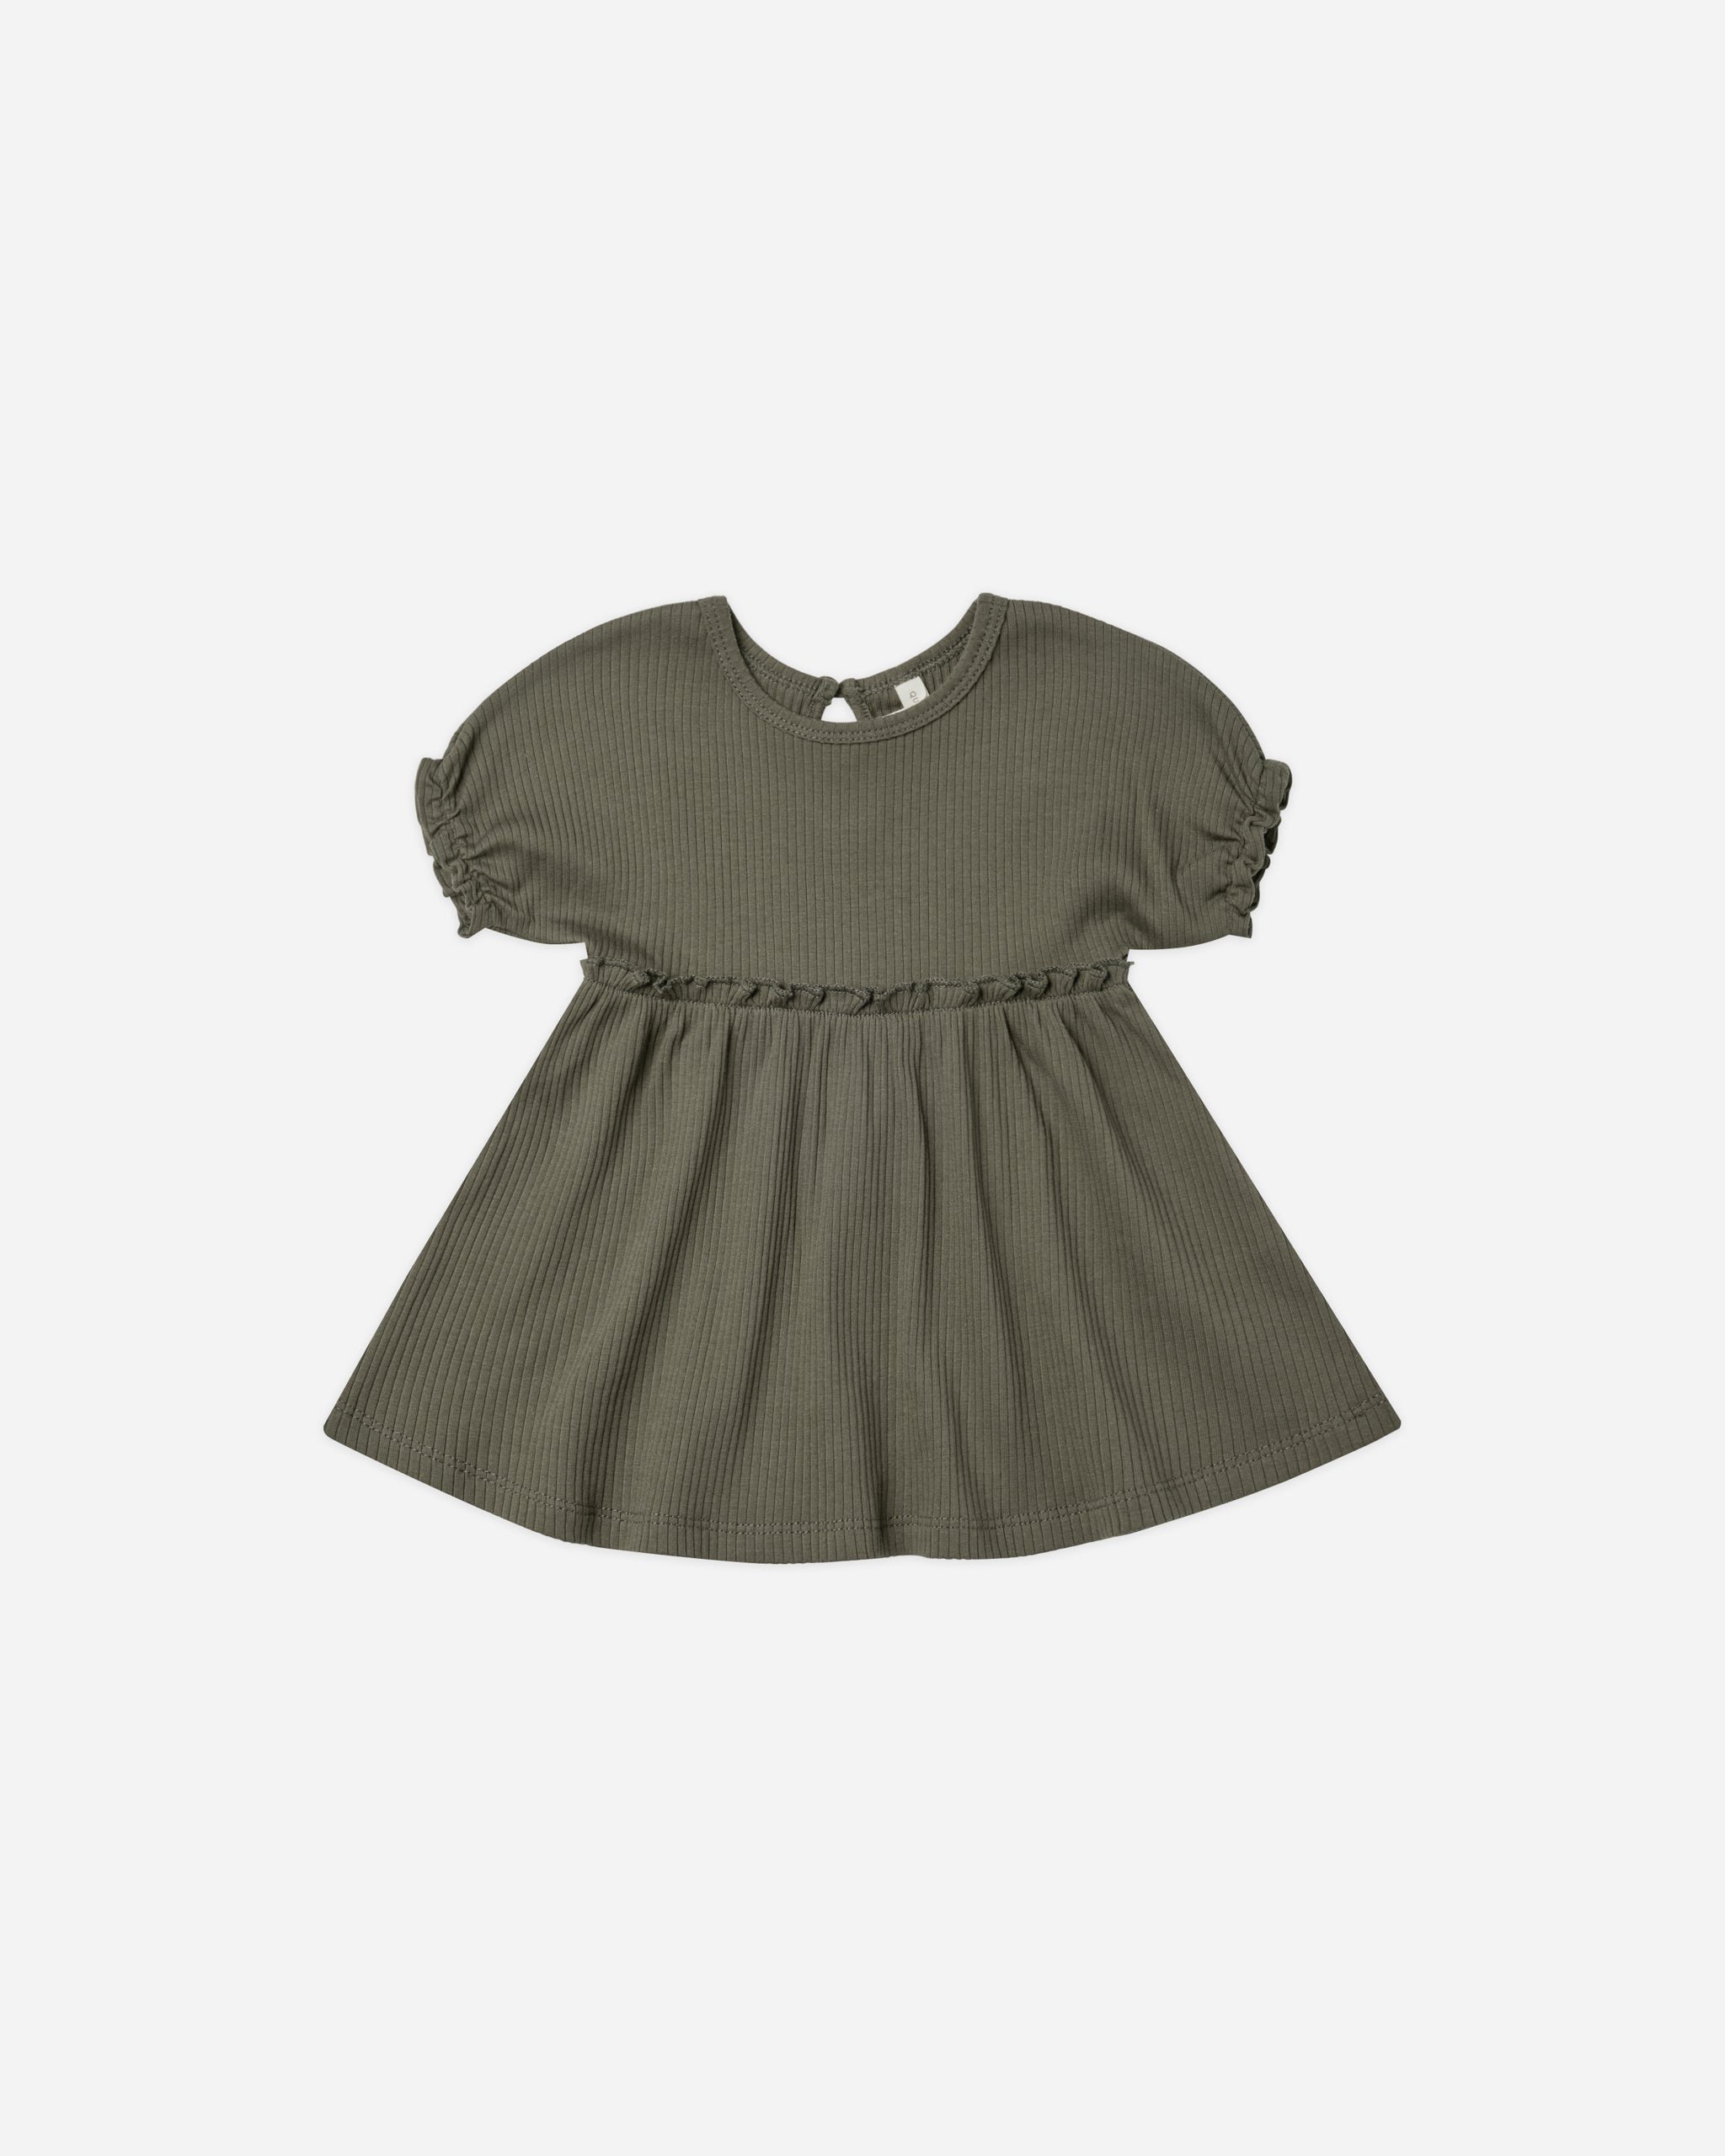 Annie Dress || Forest - Rylee + Cru | Kids Clothes | Trendy Baby Clothes | Modern Infant Outfits |